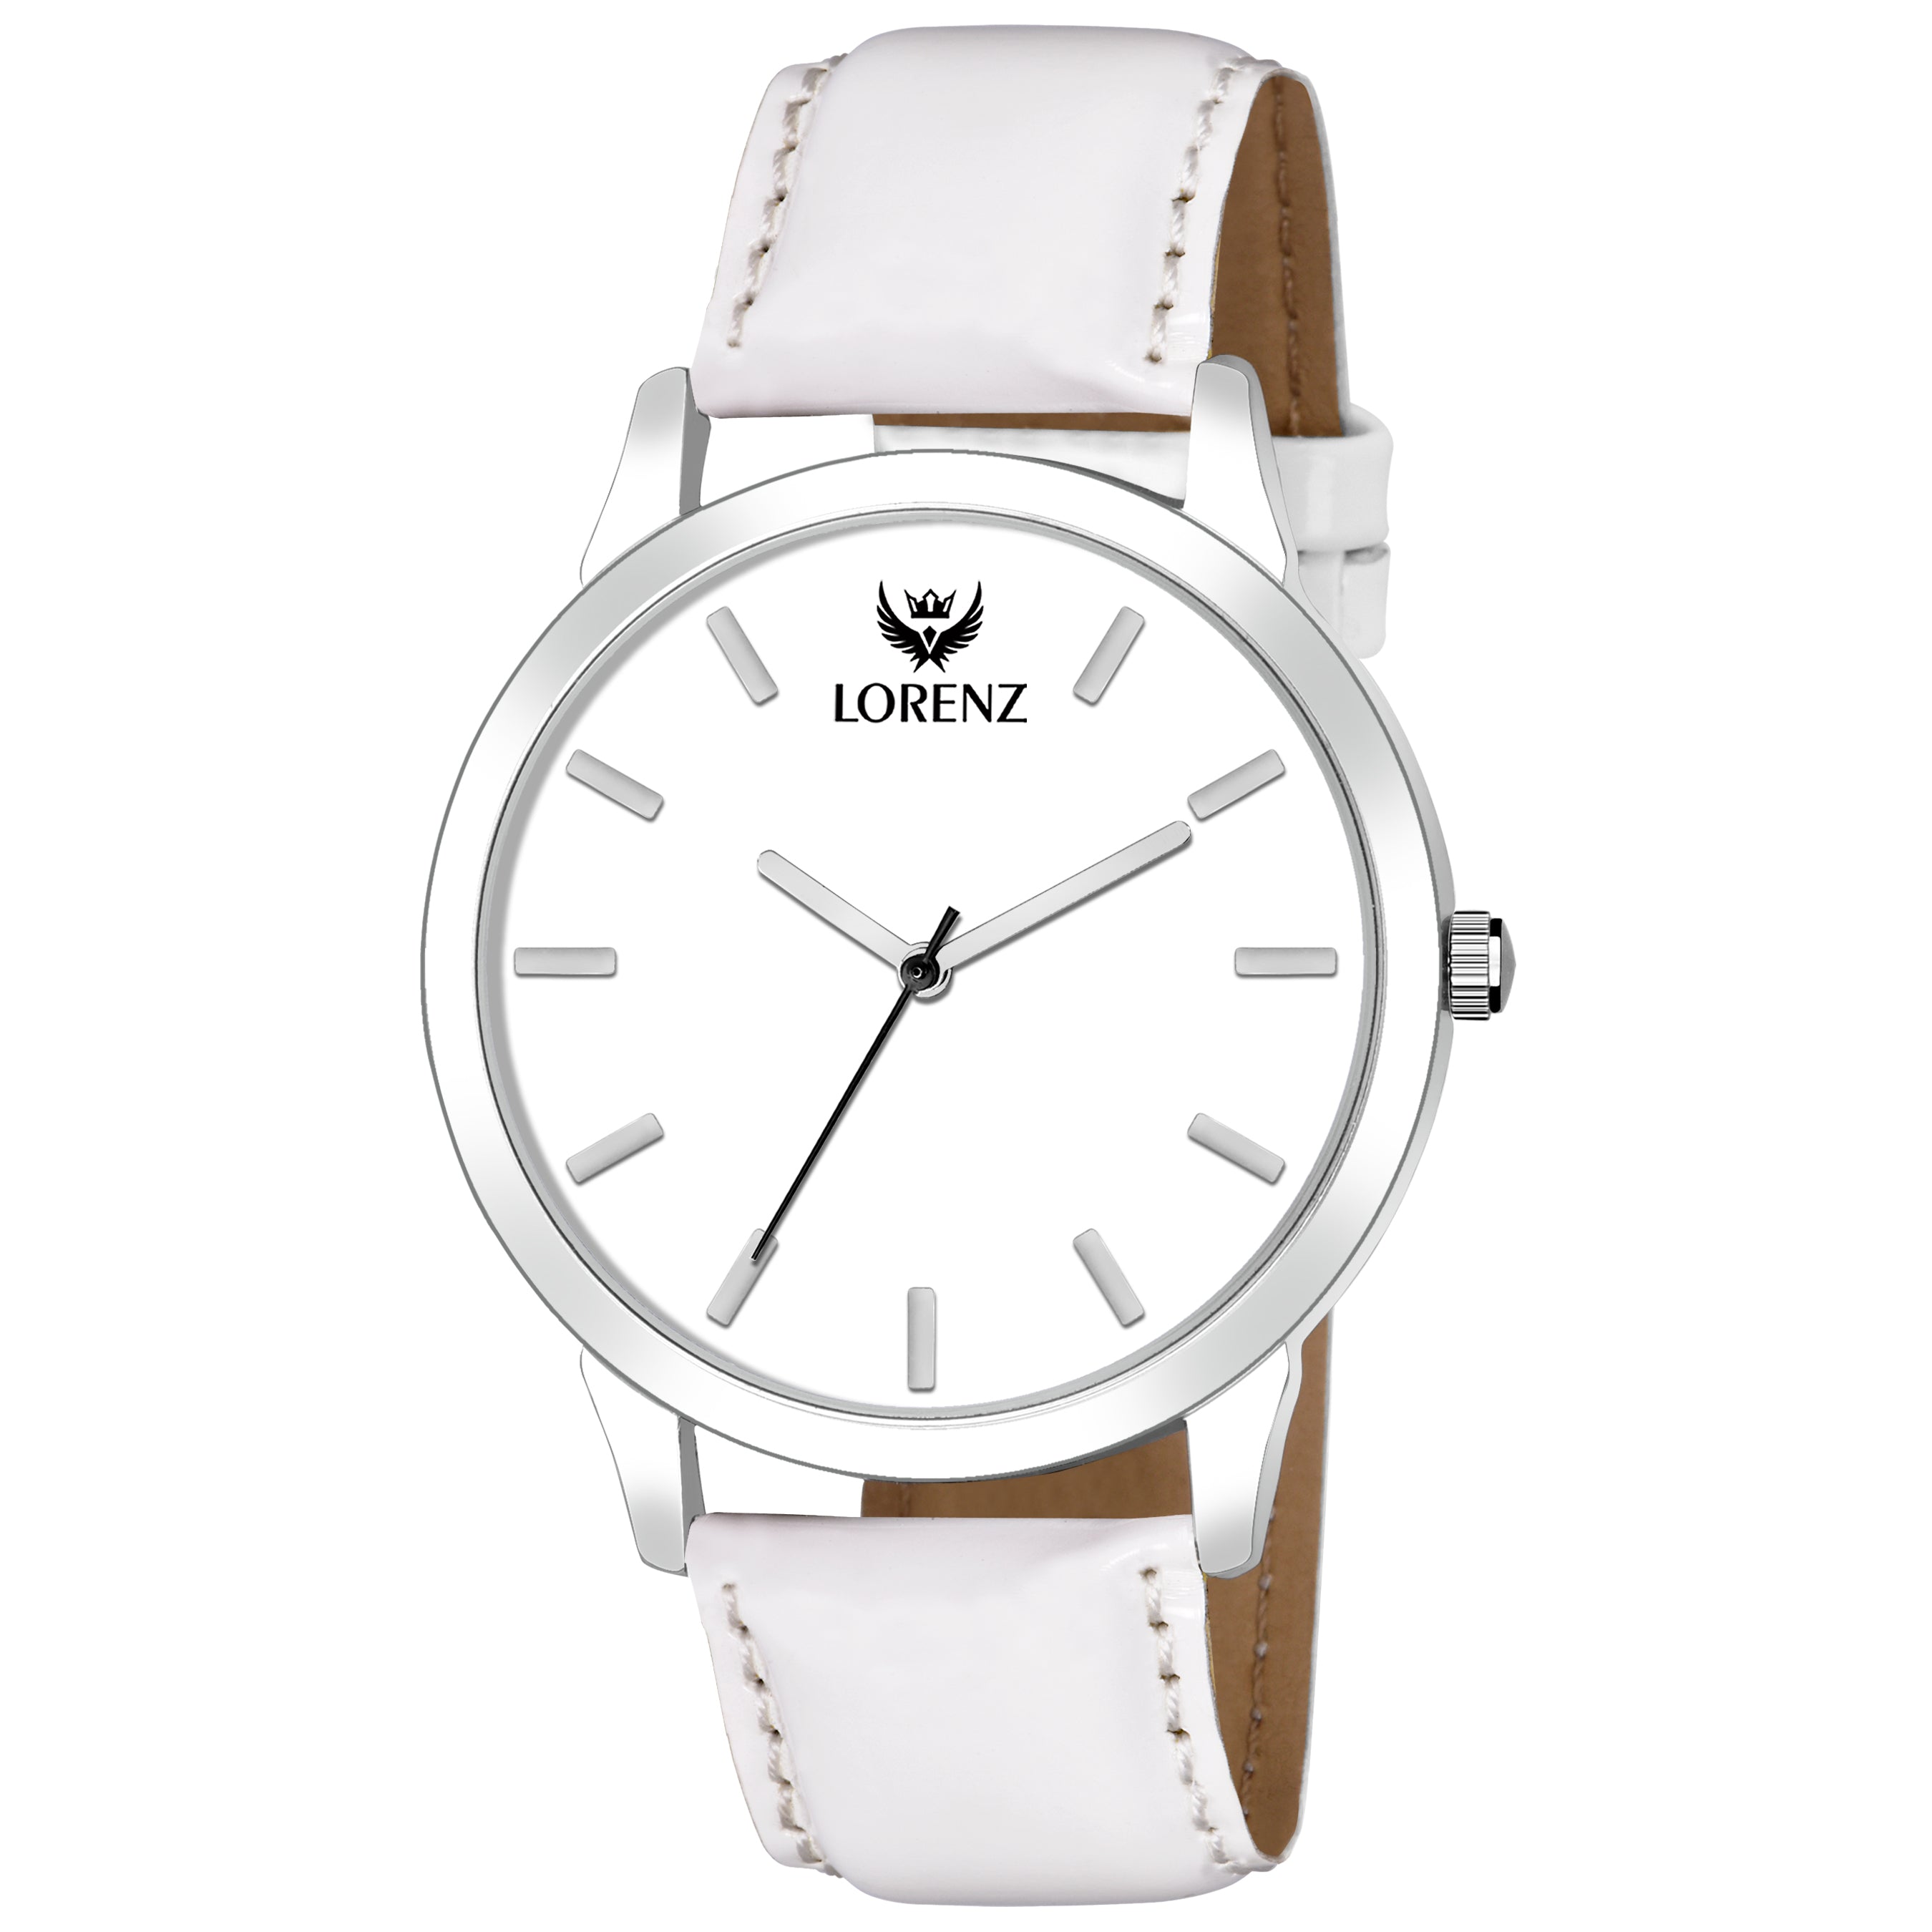 Lorenz Men's White Dial Watch with a white leather strap and blue hands.